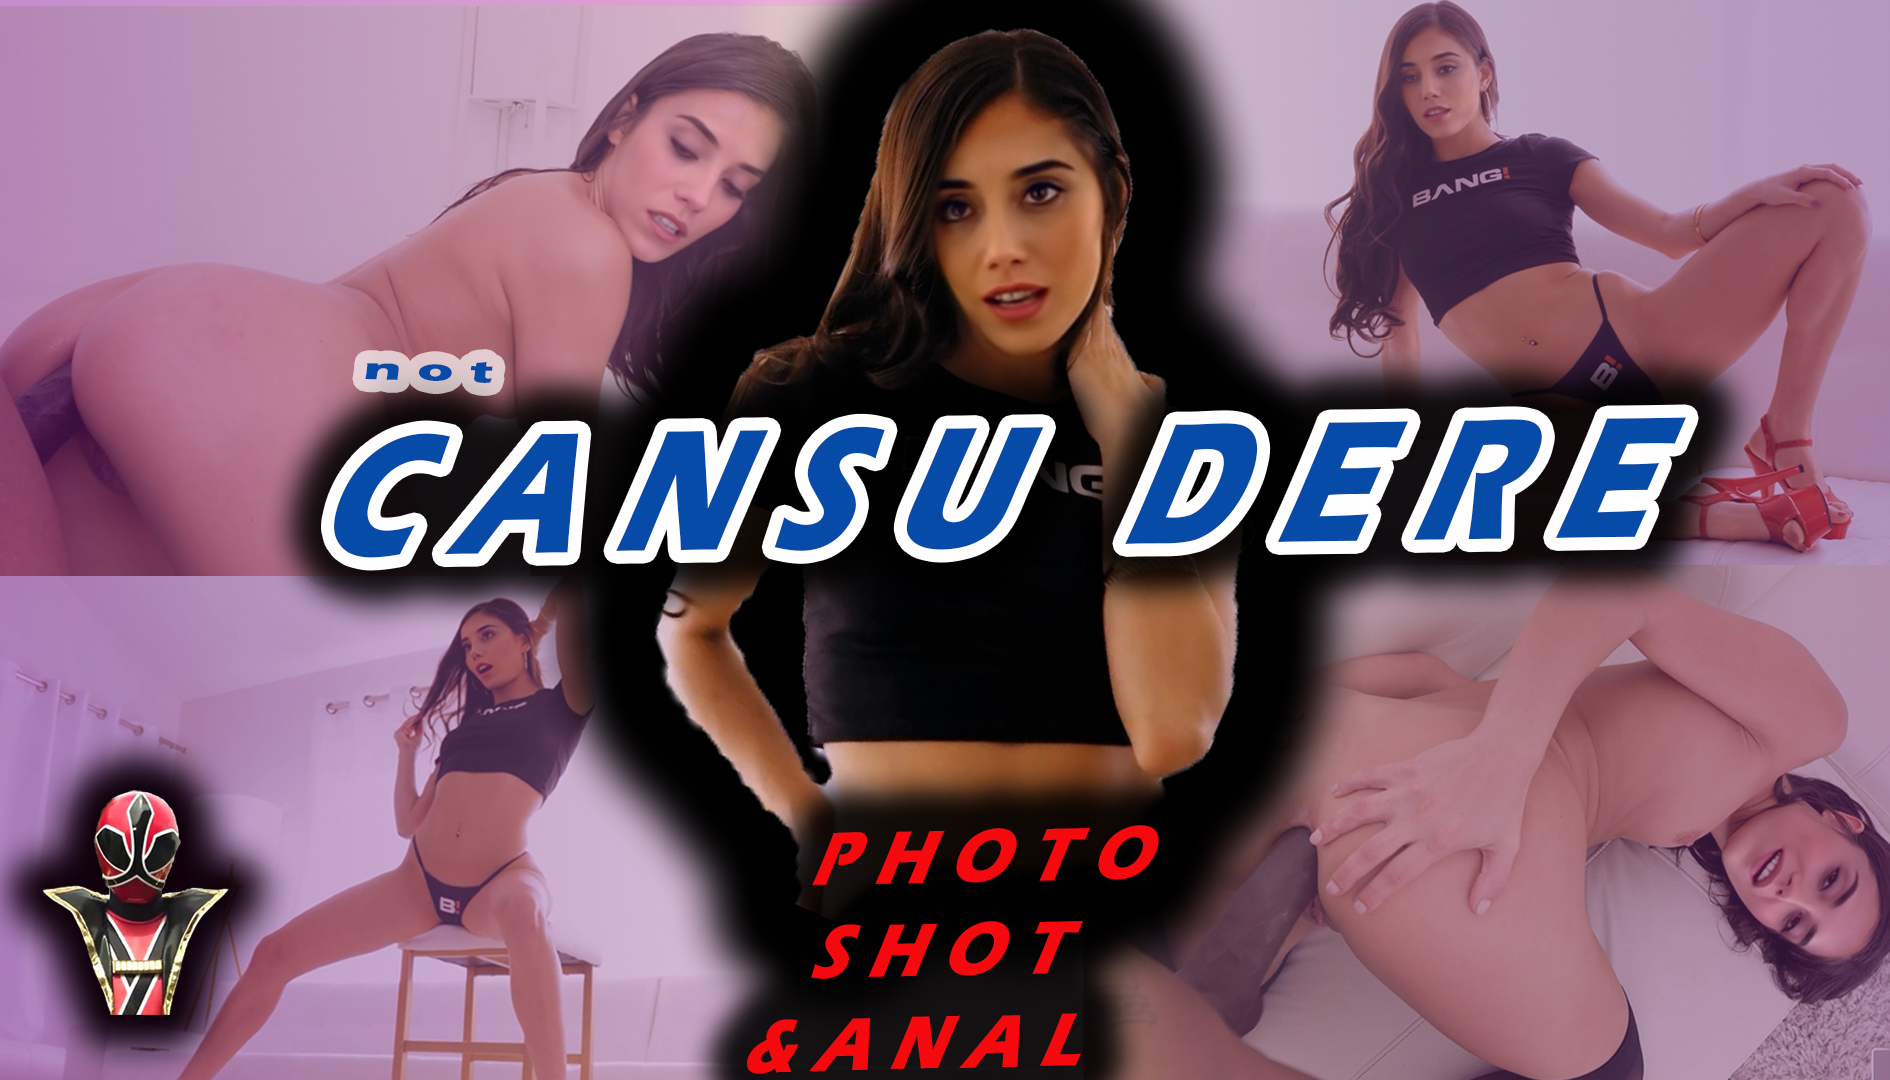 Not Cansu Dere Pirelli Calender Photoshoot and Anal - DM FOR FULL VIDEO